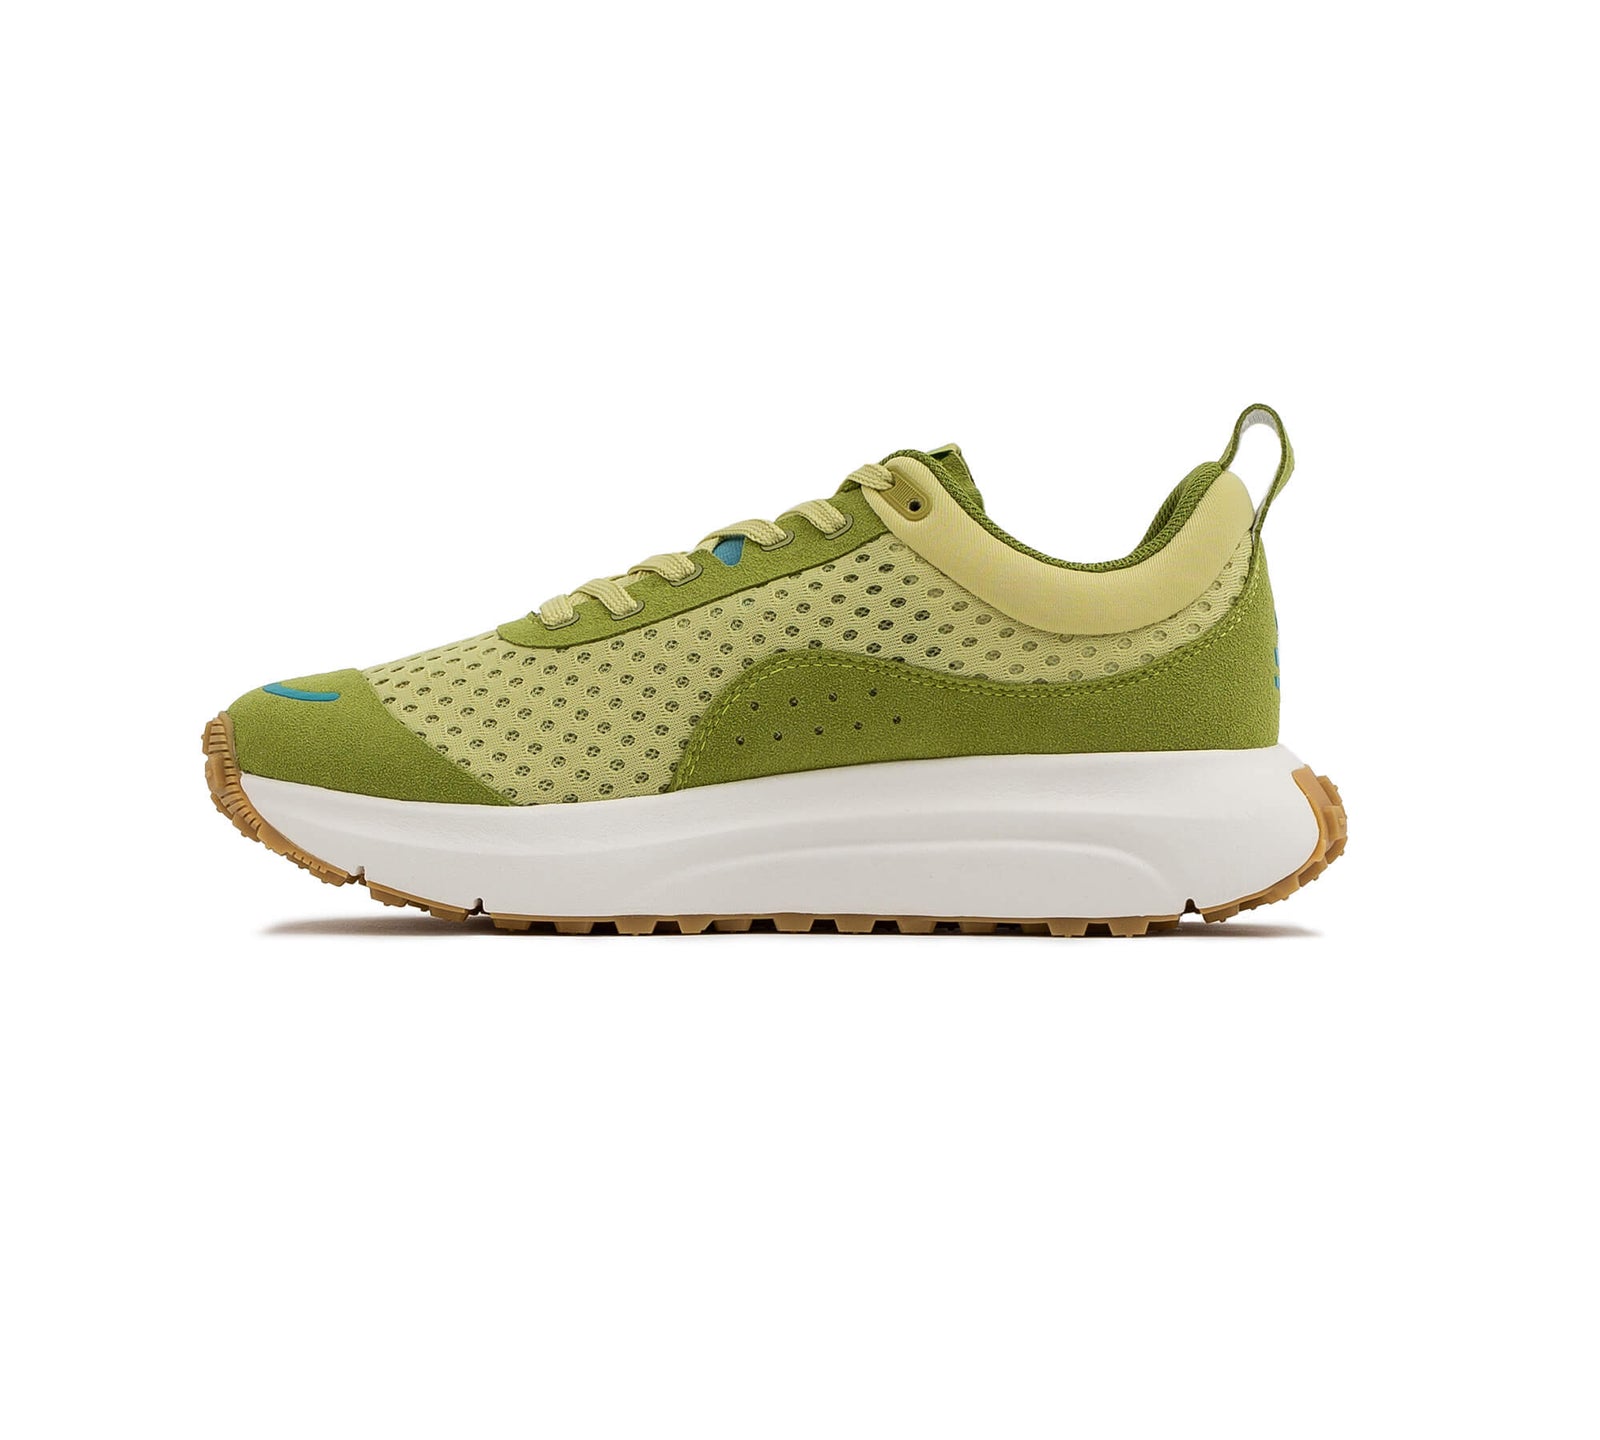 Hilma Running Shoes - Linden Green Side Angle